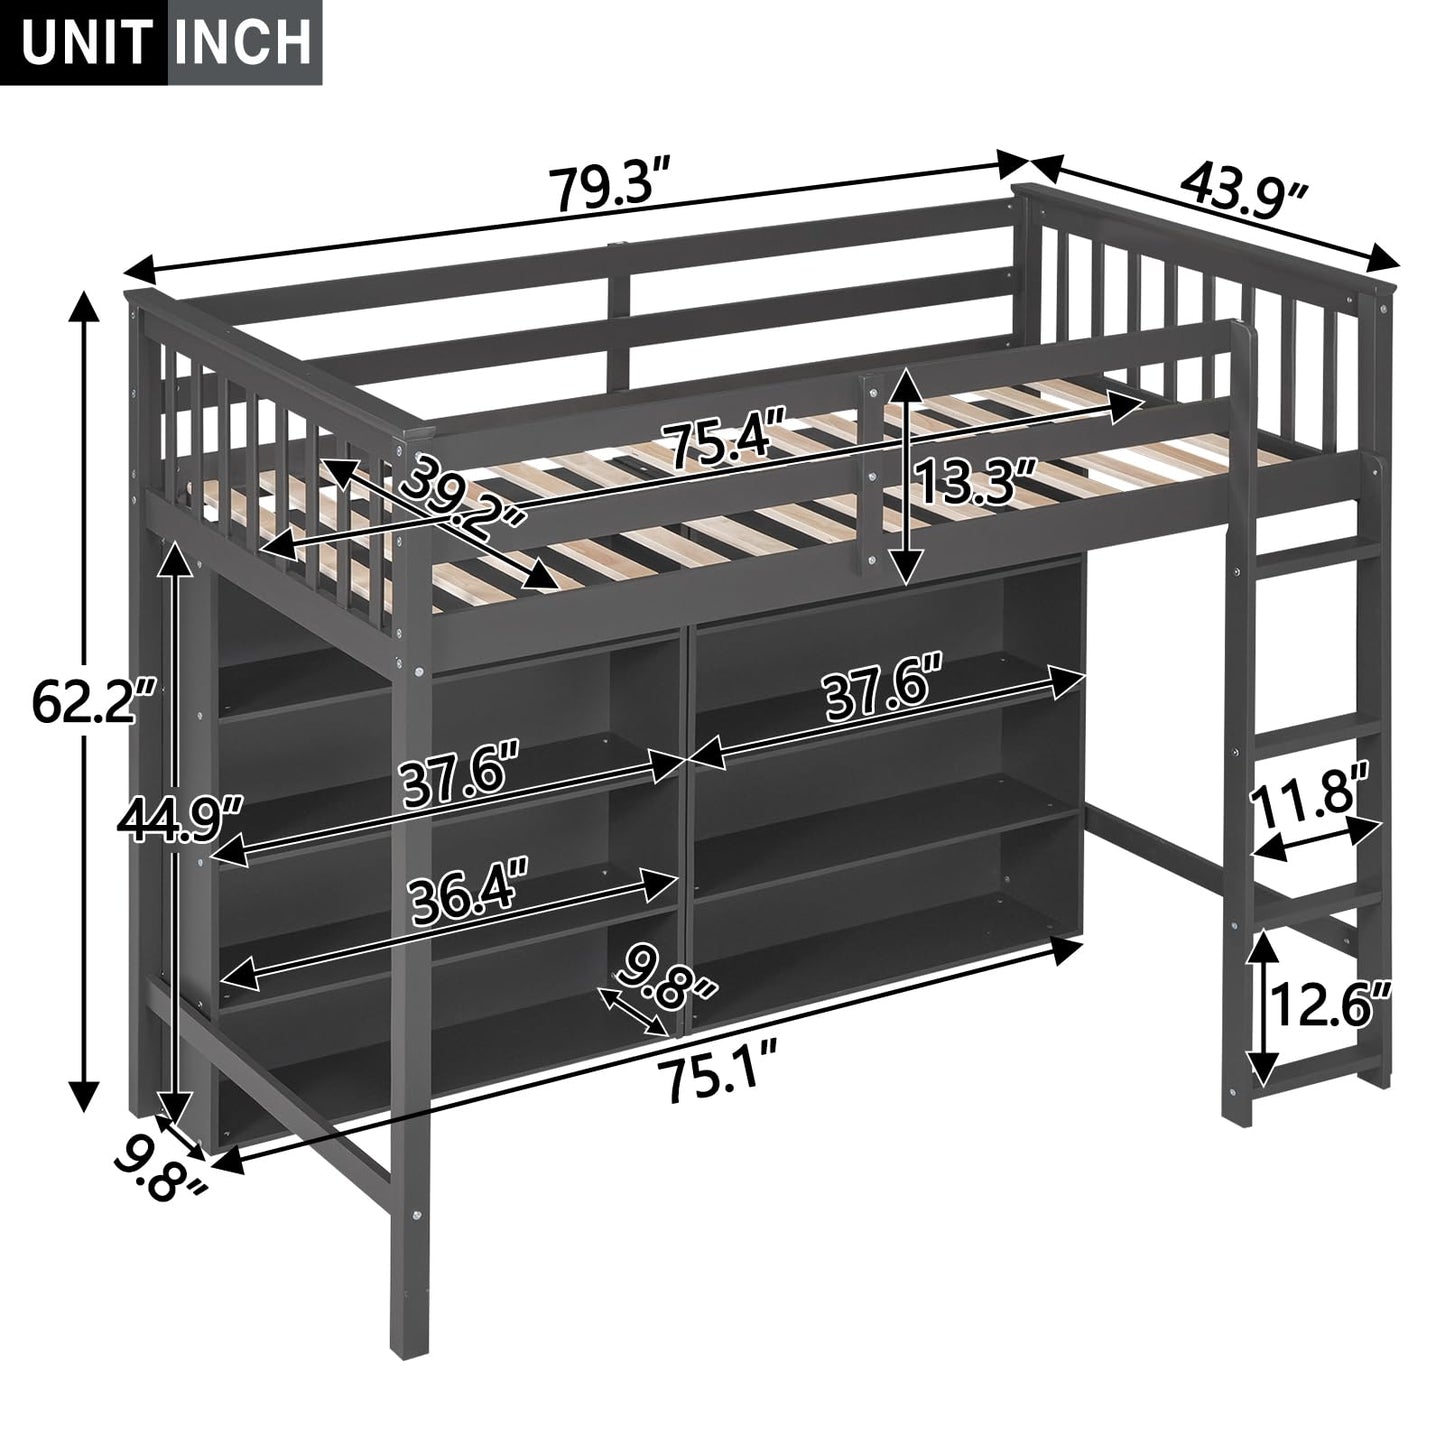 SOFTSEA Twin Size Loft Bed with Storage, Solid Wood Loft Bed with Open Storage Shelves, Multi-Functional Loft Bed Frame with Ladder for Kids Boys Girls Teens, Grey